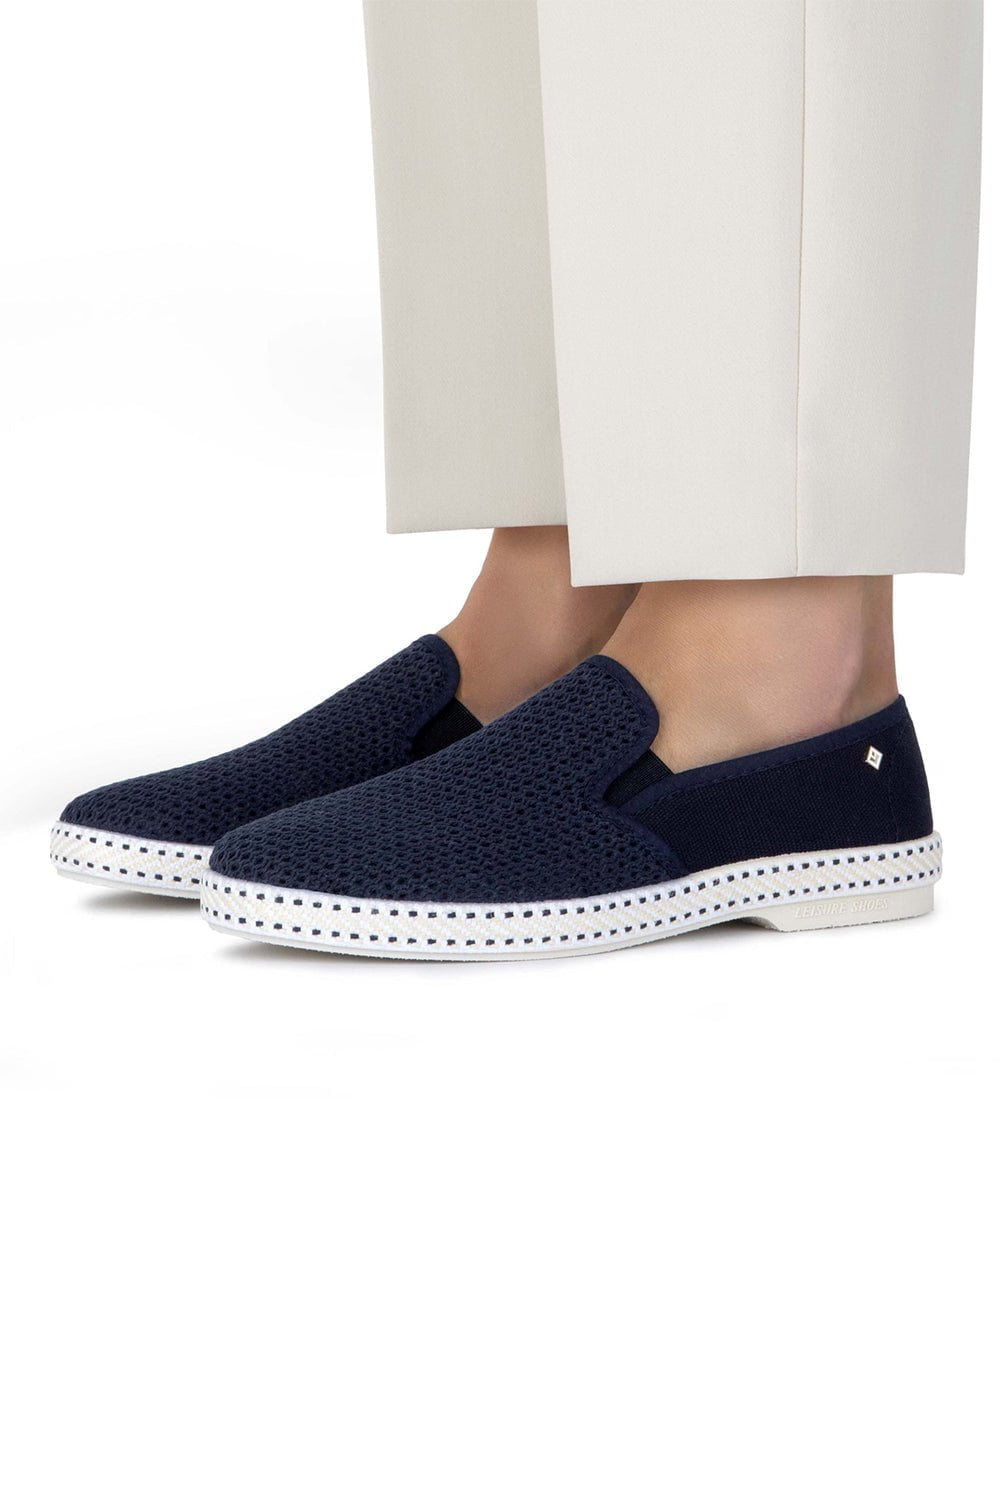 Classic Canvas & Mesh Navy Slip On Loafer MENSSHOECASUAL RIVIERAS   